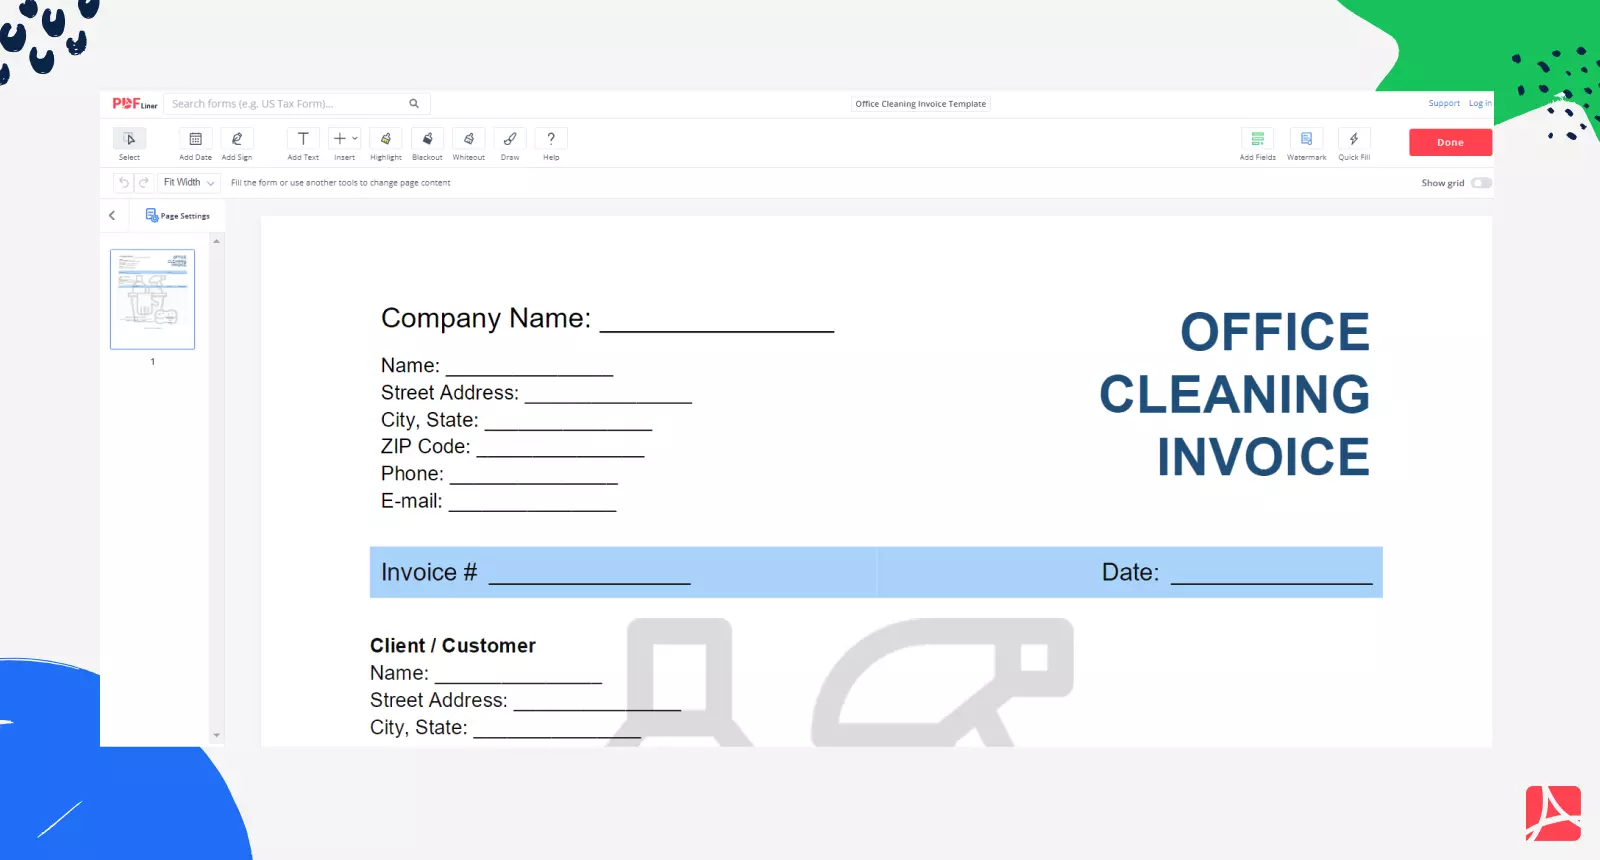 Office Cleaning Invoice Template on PDFLiner